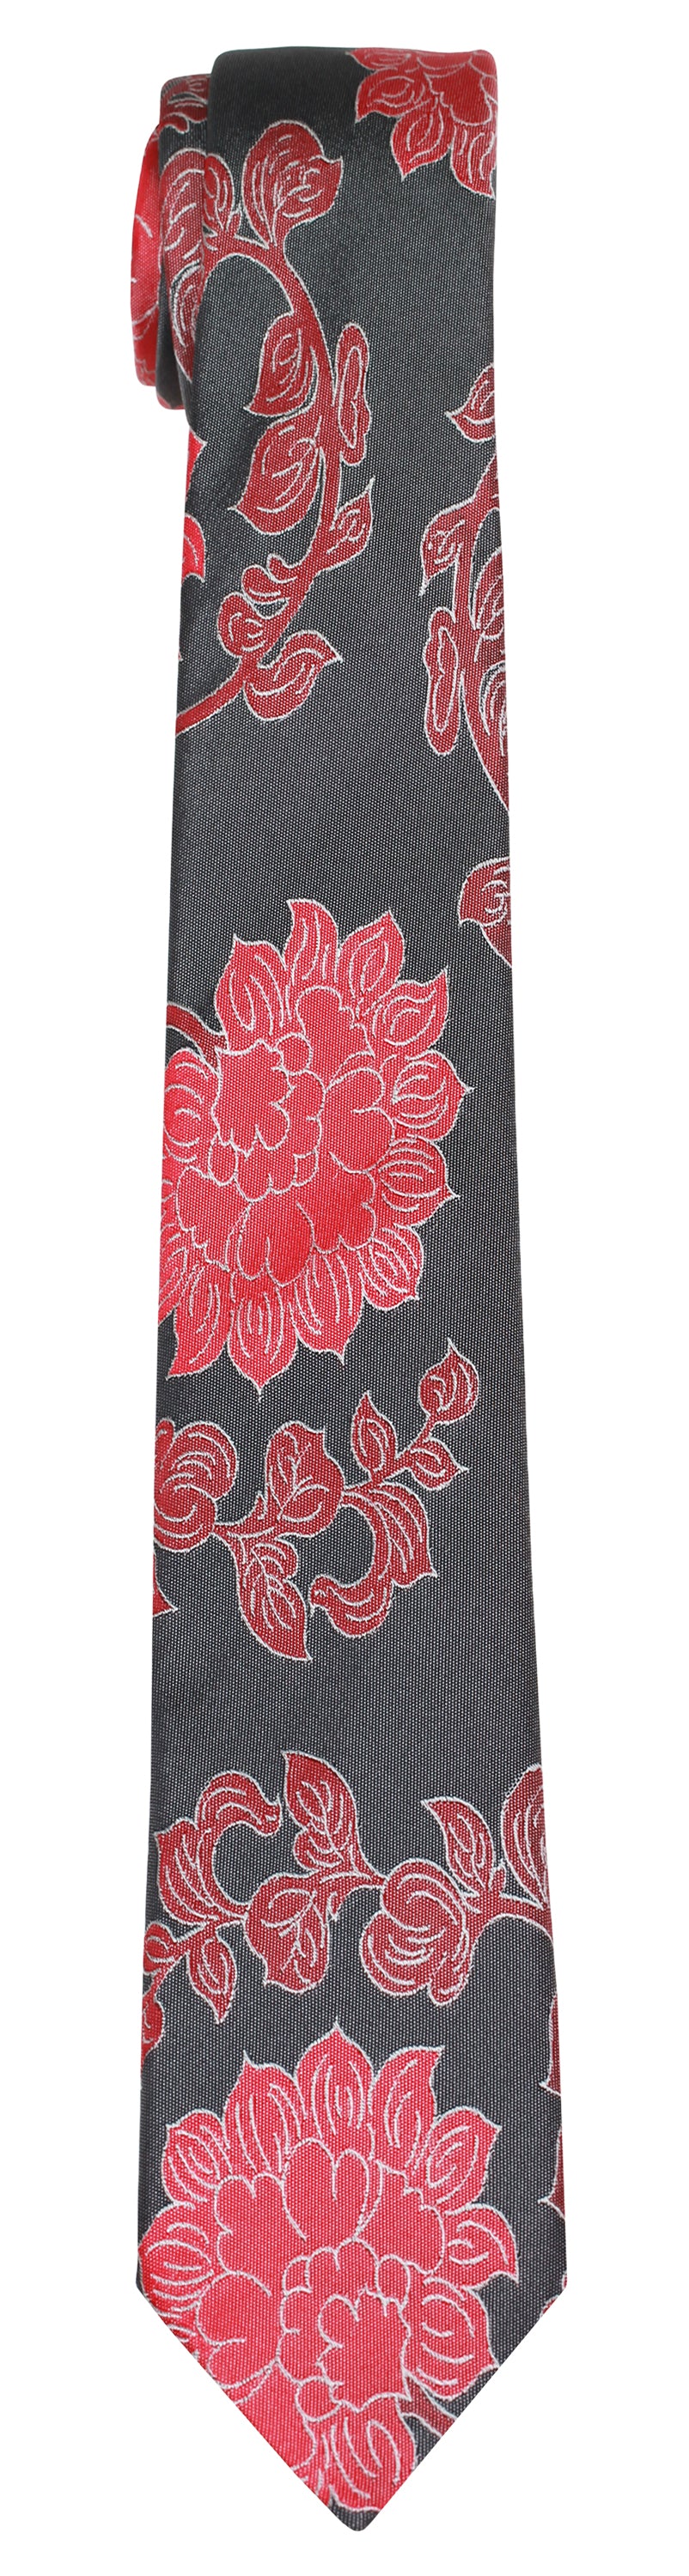 Mimi Fong Lotus Tie in Charcoal